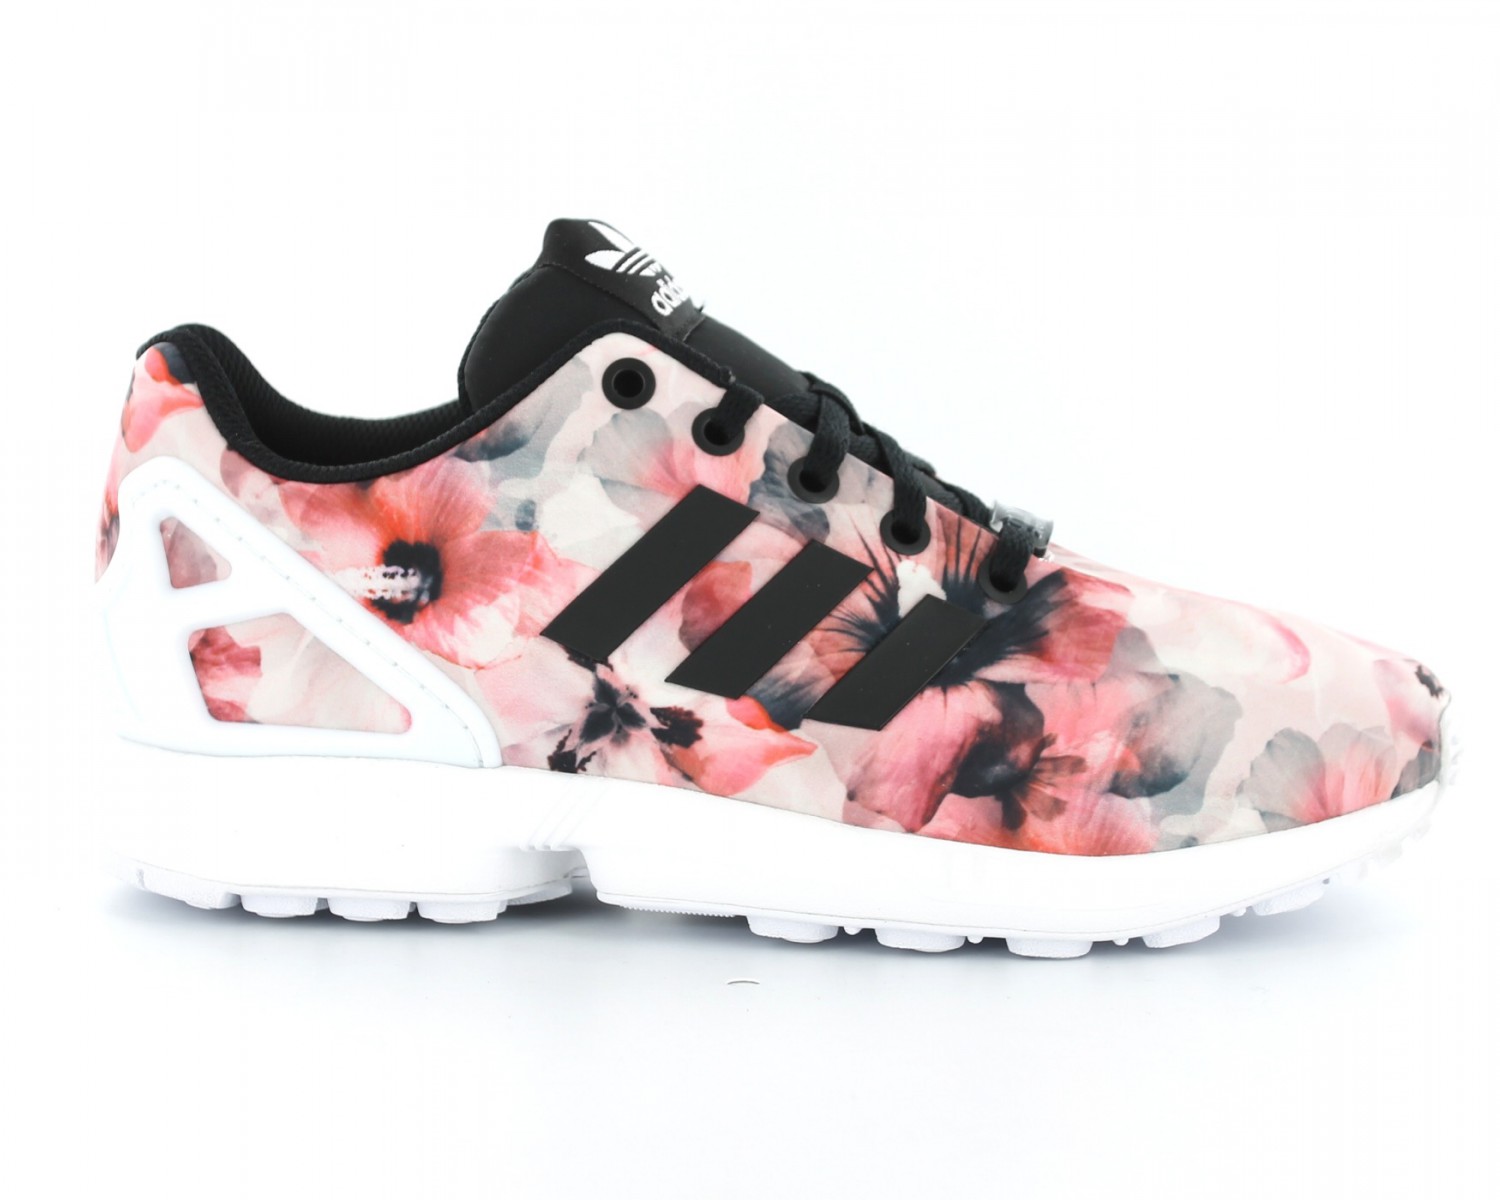 zx flux femme adidas Off 51% - www.bashhguidelines.org